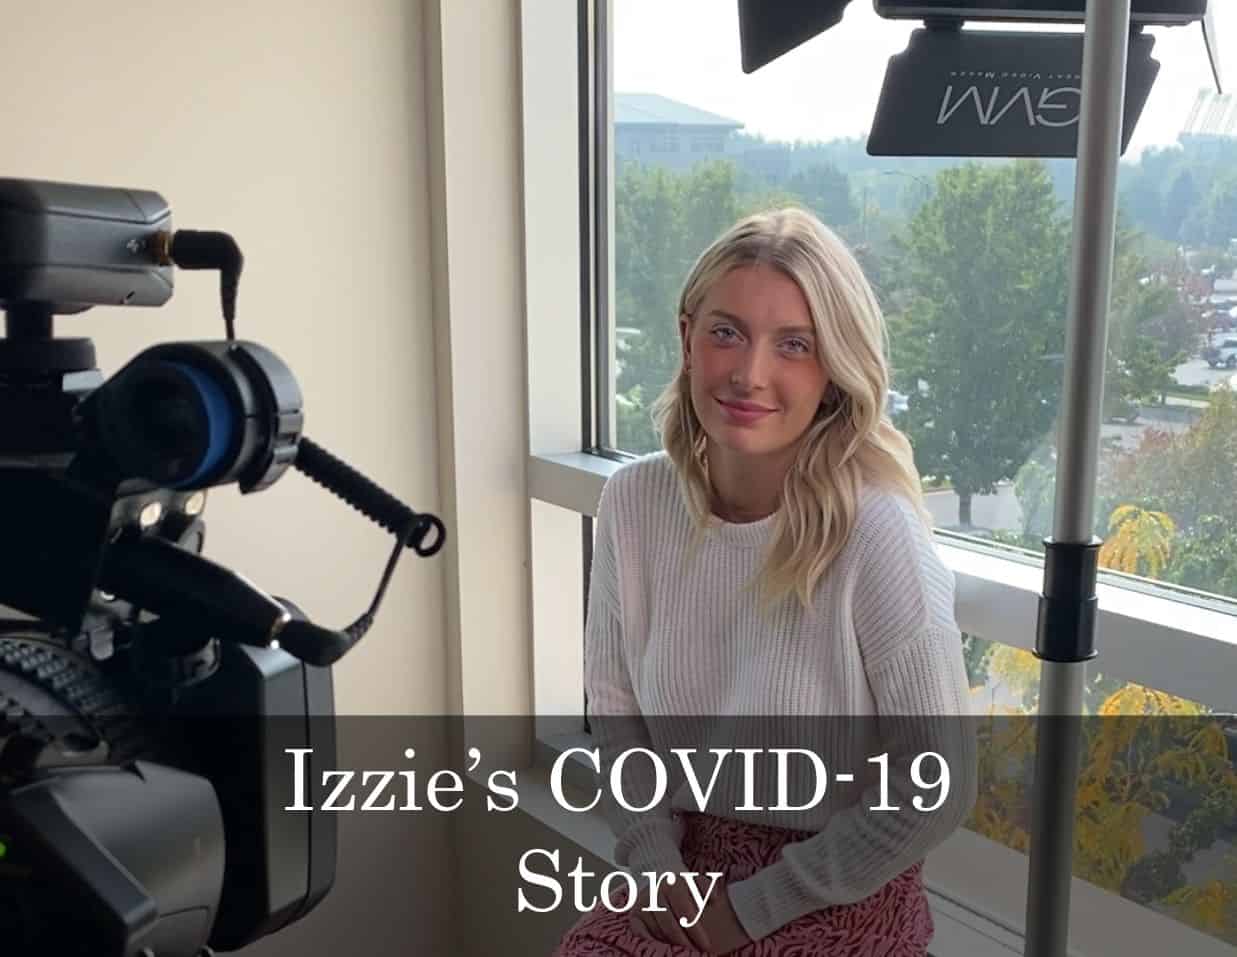 Izzie telling her story of Covid-19